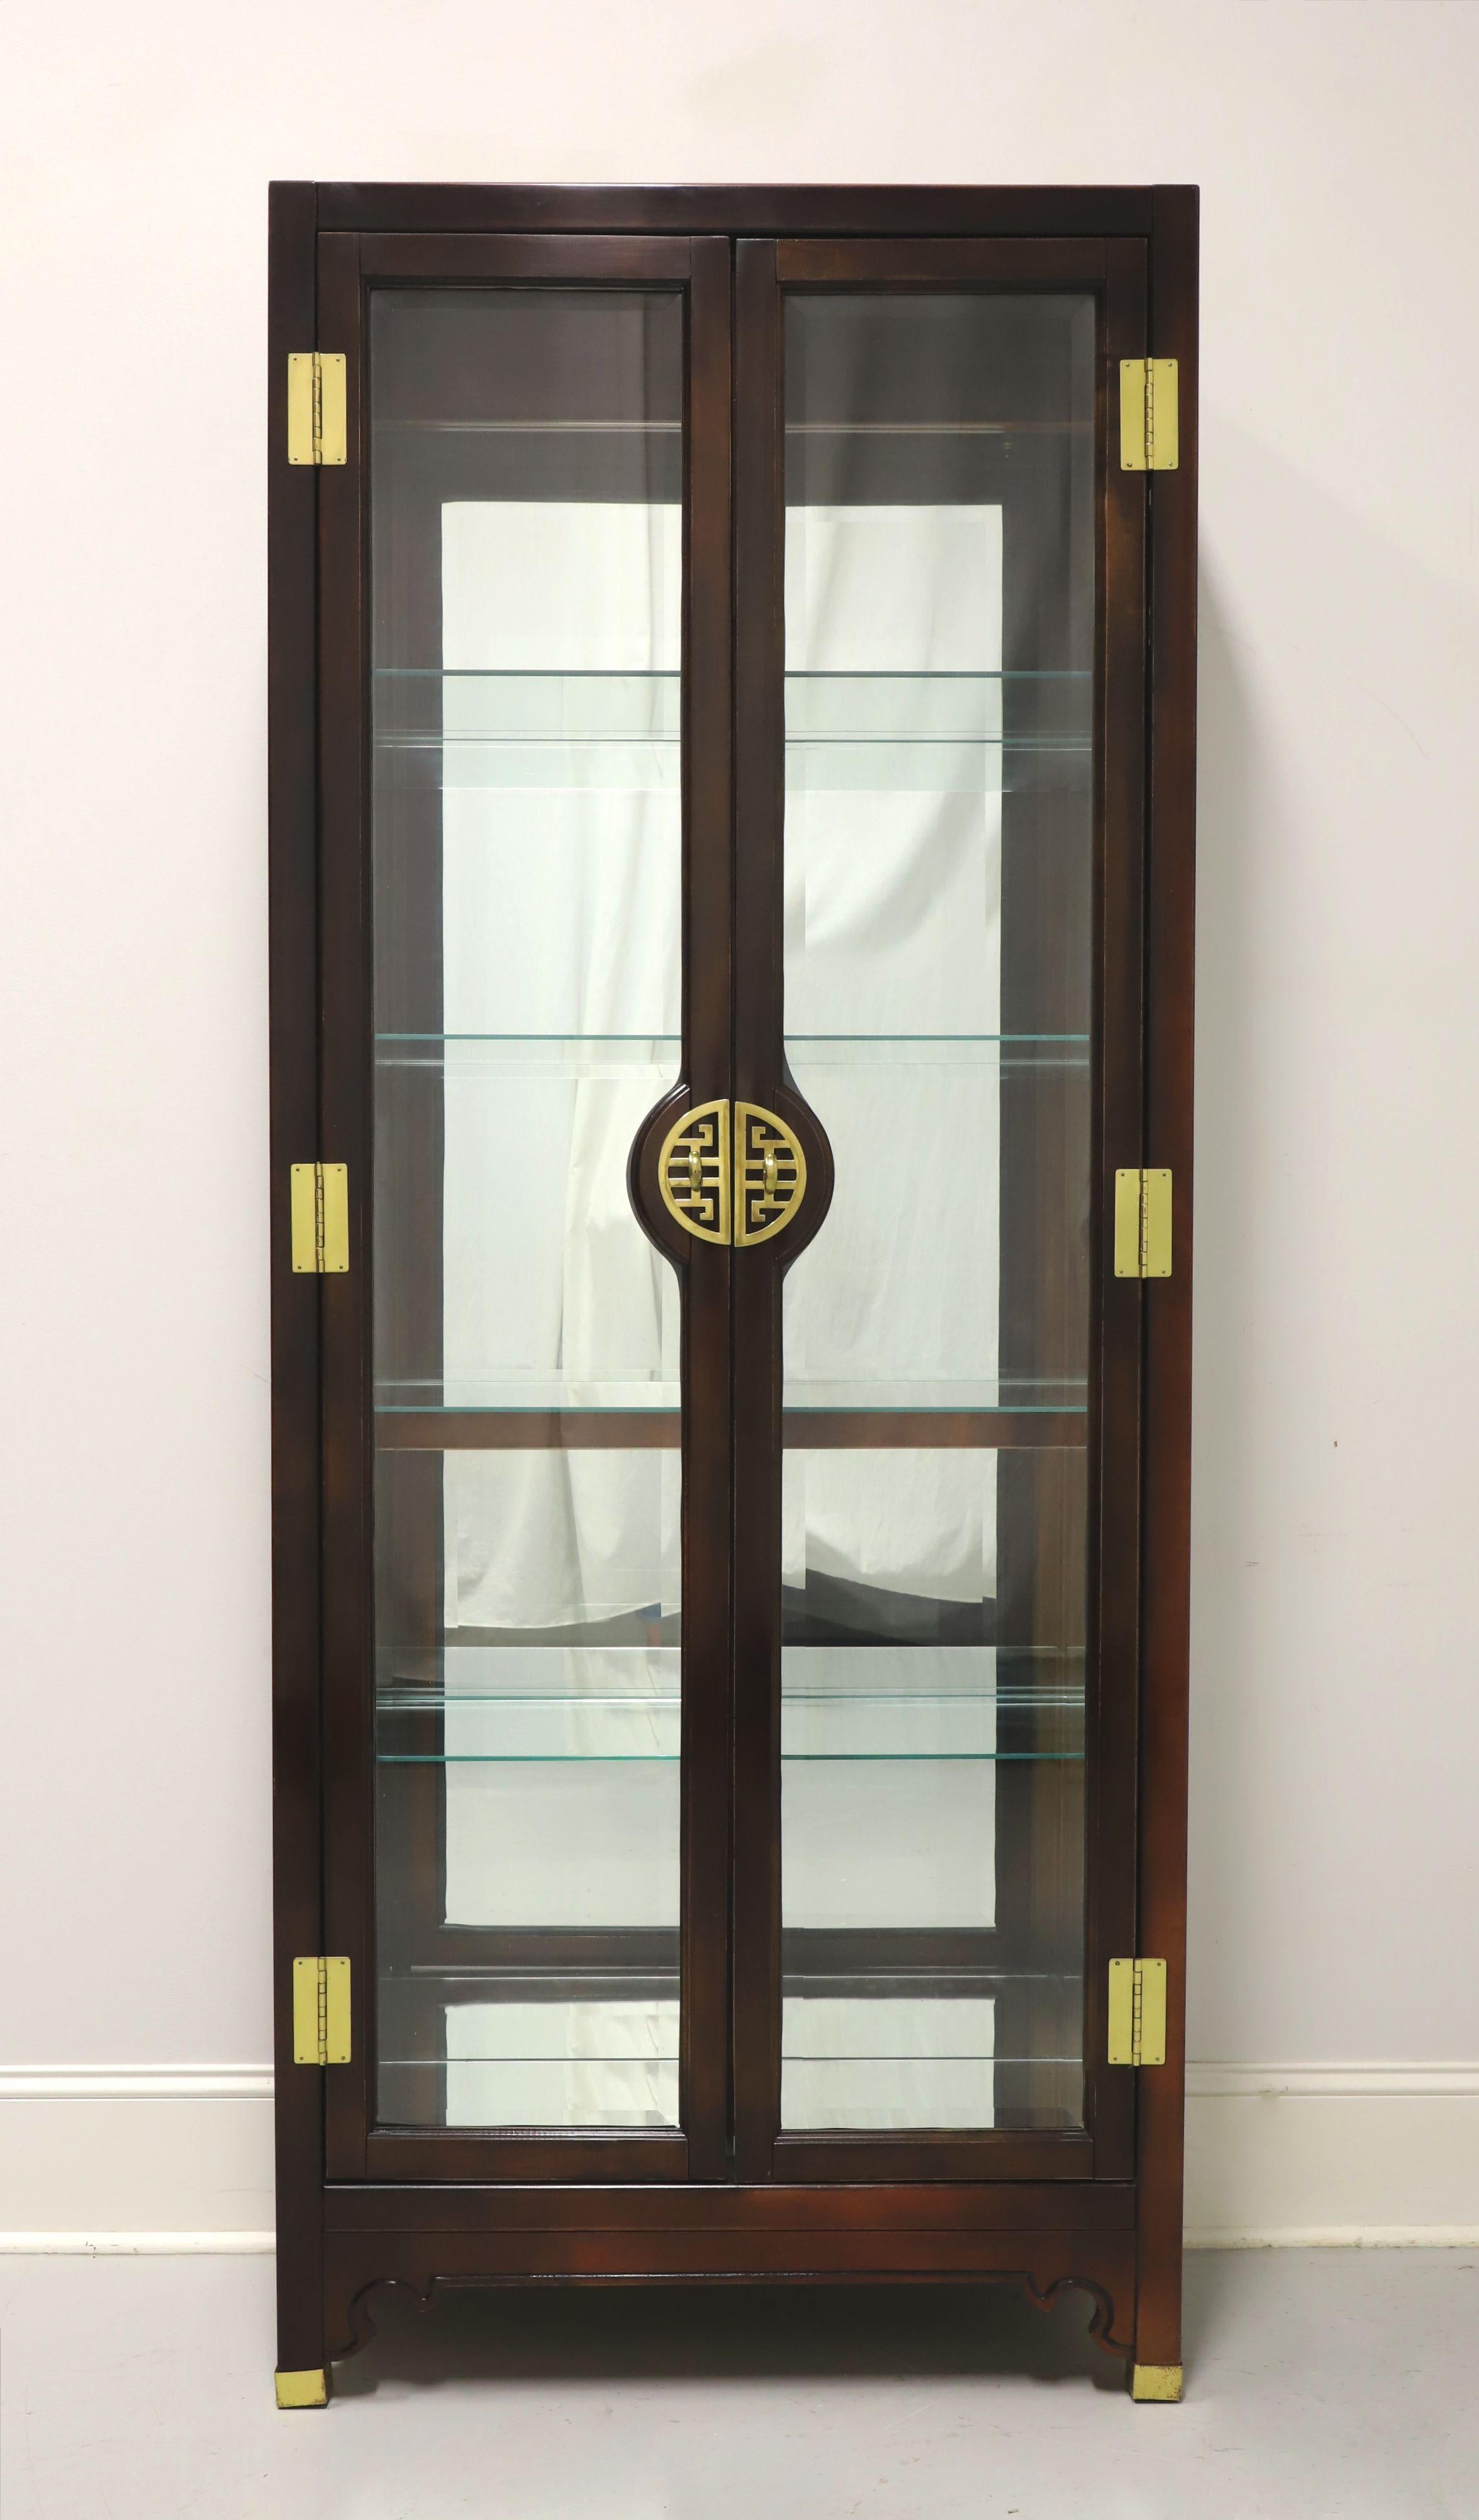 An Asian Chinoiserie style curio cabinet by American of Martinsville. Solid highly polished mahogany, decorative Chinoiserie brass hardware, dual beveled glass front doors and glass side panels. Features lighted interior cabinet with mirrored back